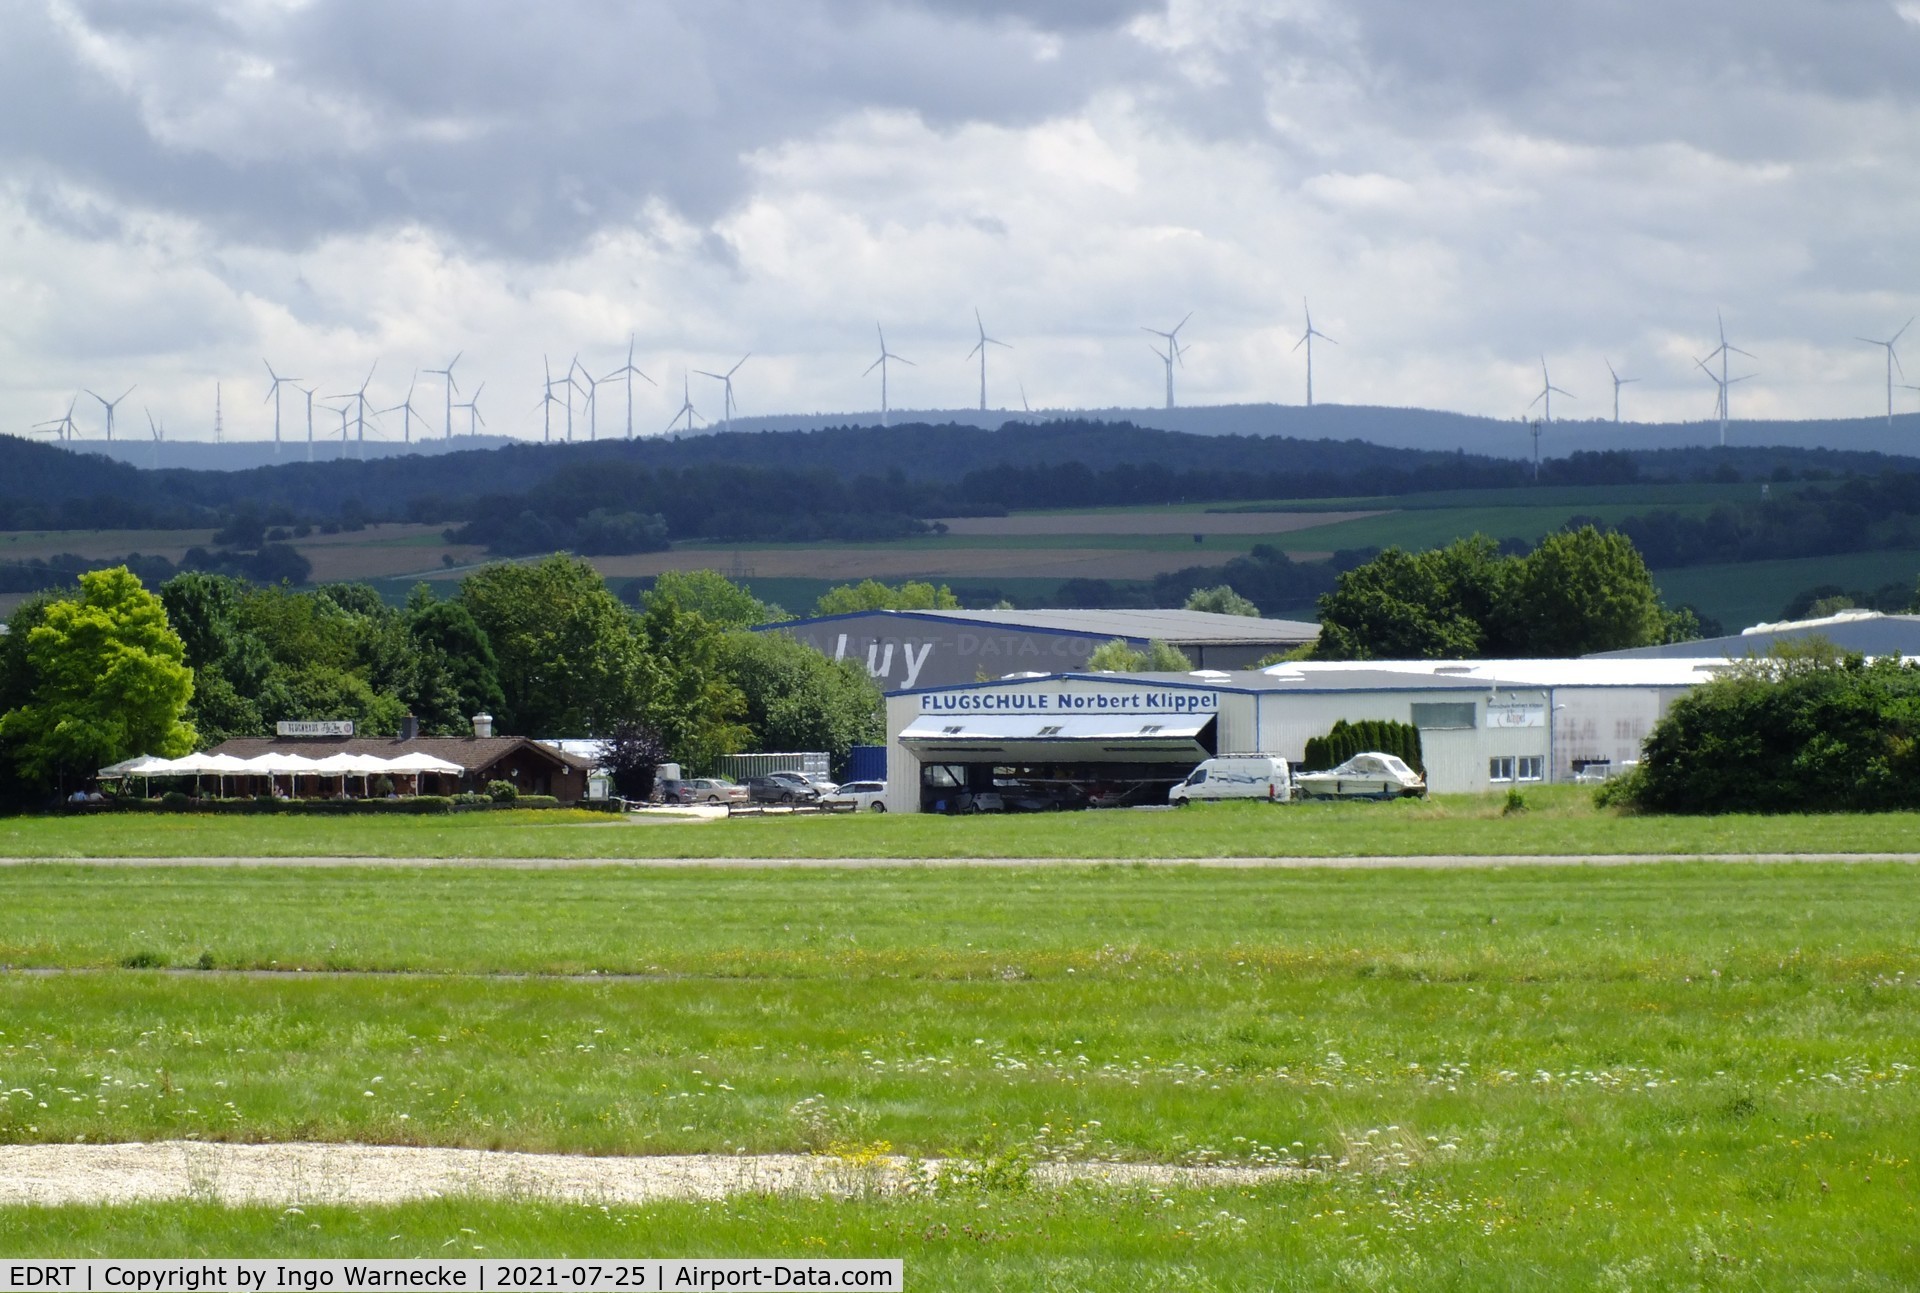 EDRT Airport - buildings on the other side of Trier-Föhren airfield